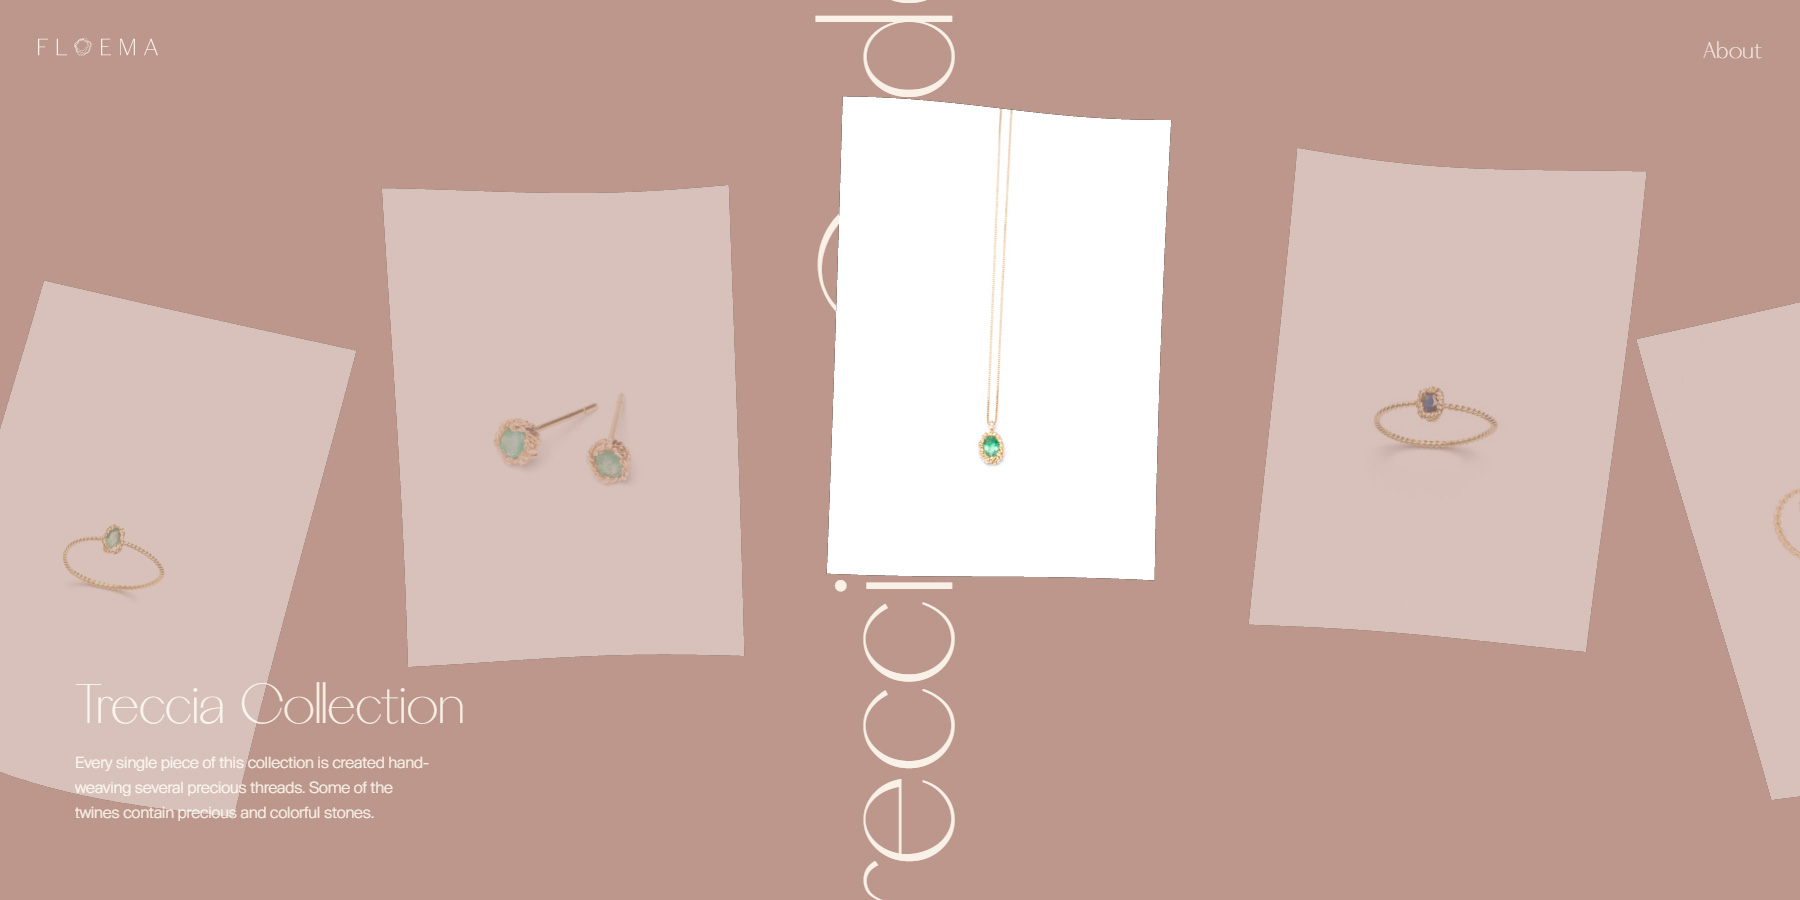 Floema Jewelry - Website of the Day